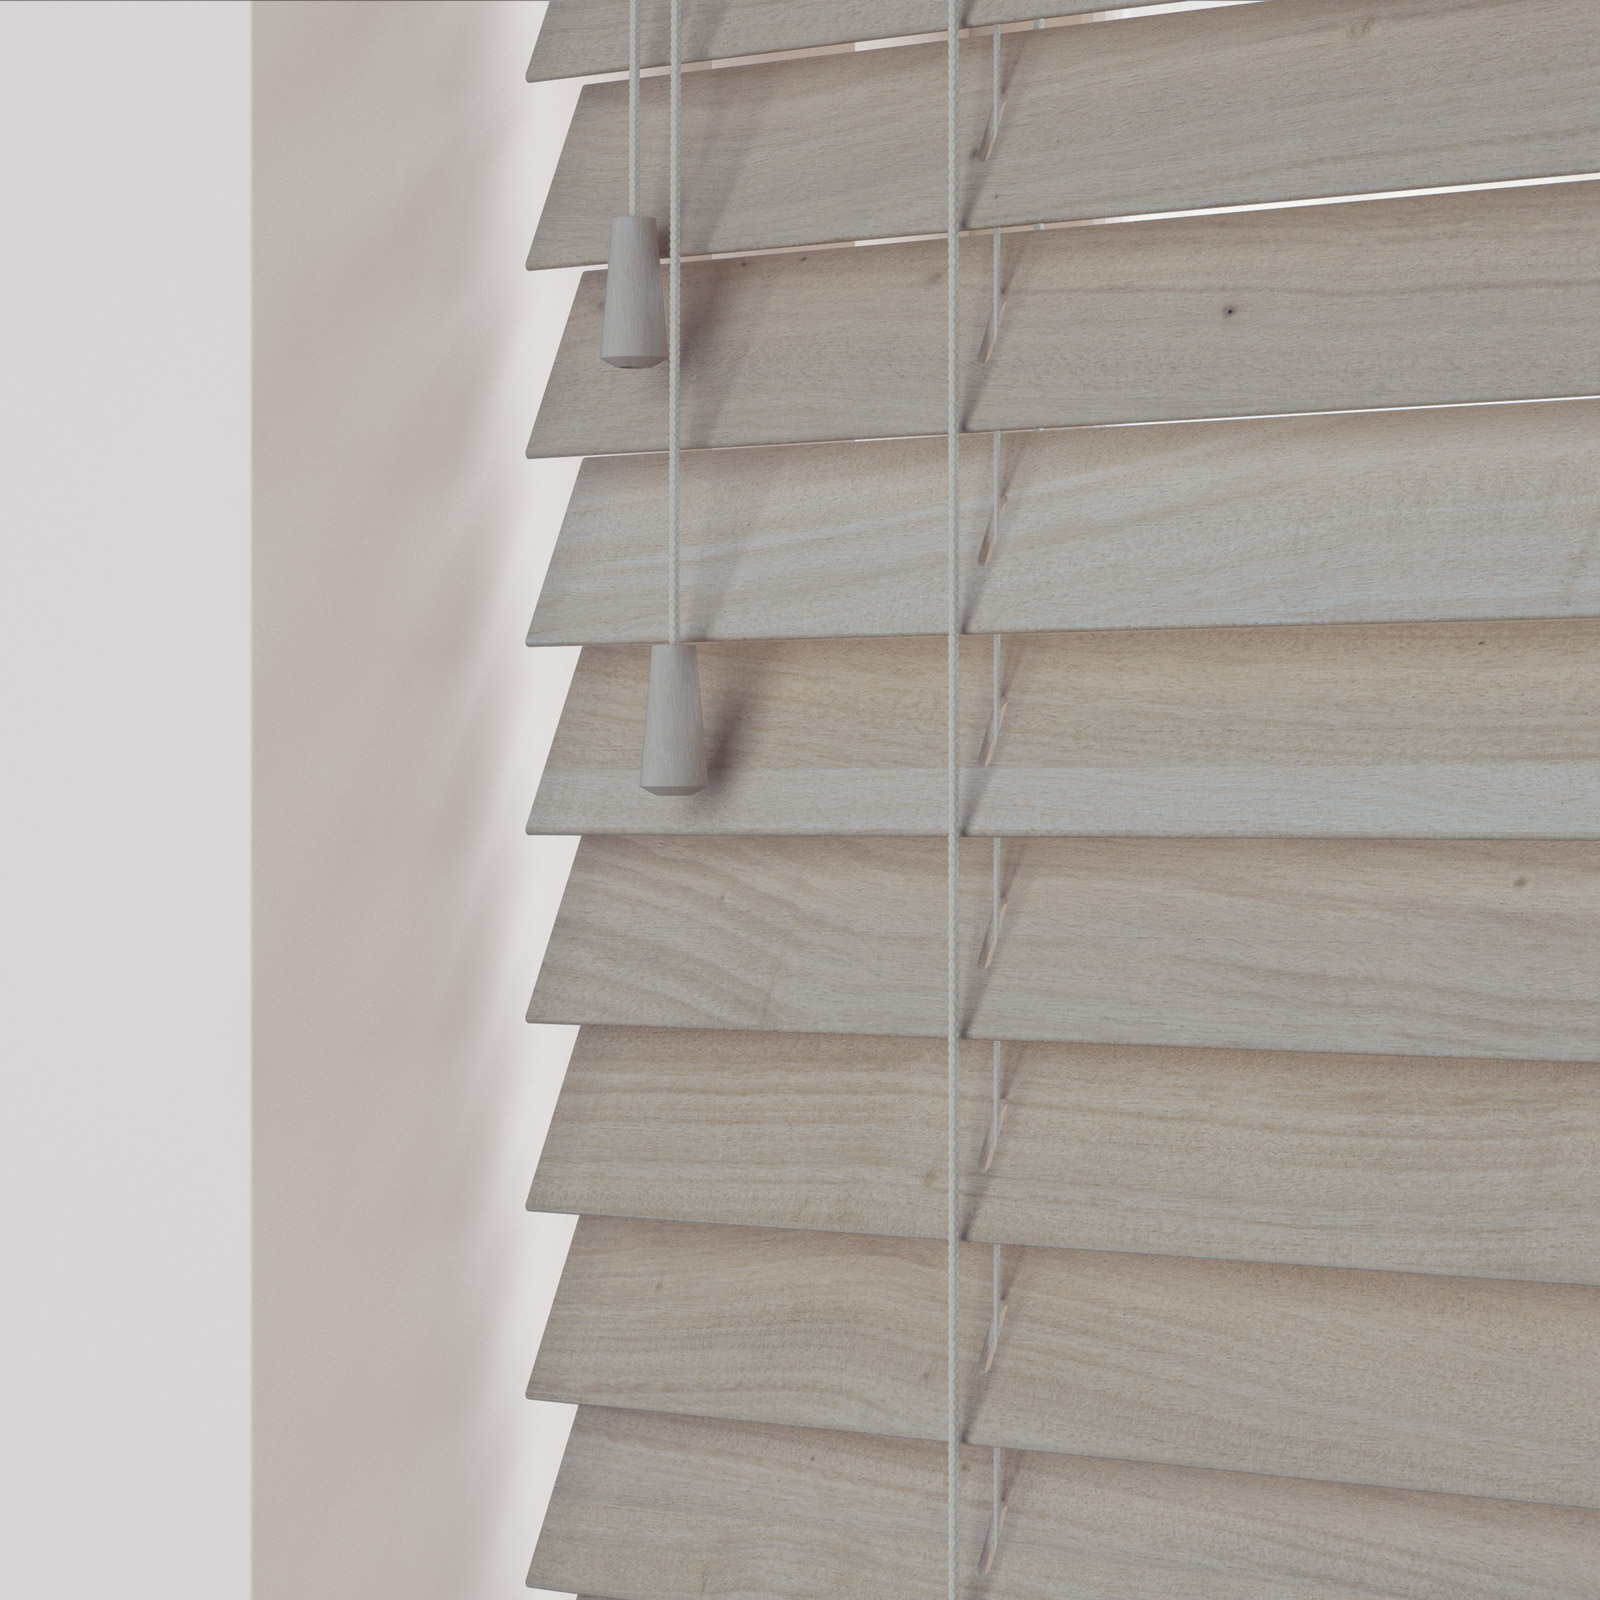 UK Suppliers of Wooden Venetian Blinds With 25mm Slats